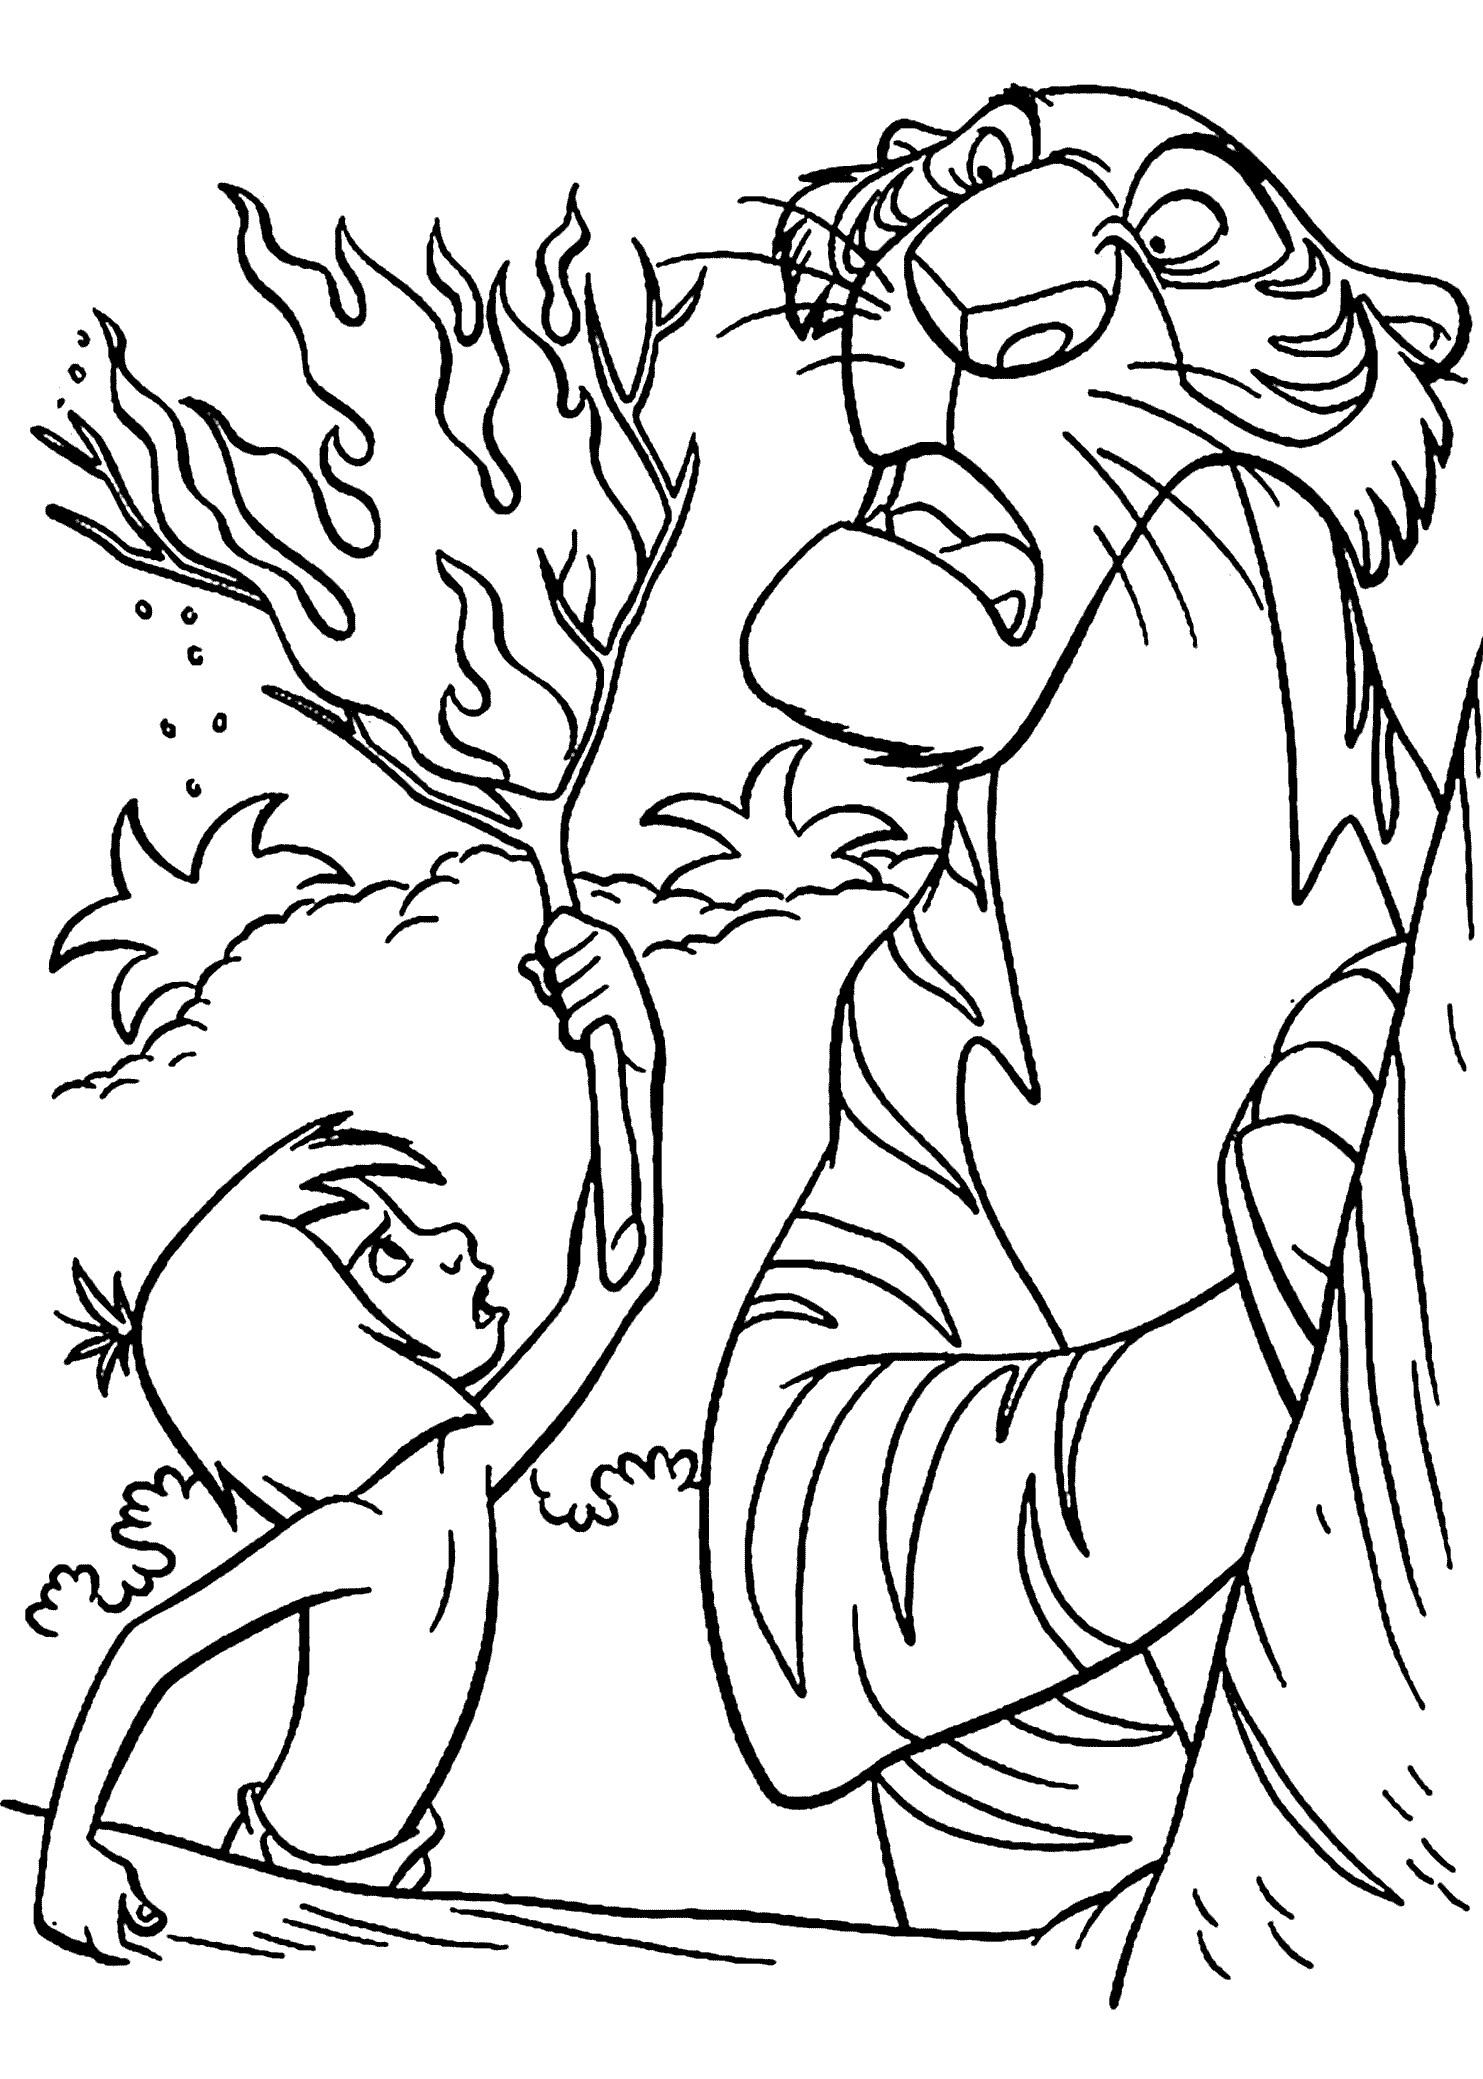 Jungle Coloring Pages Jungle Coloring Pages Best Coloring Pages For Kids